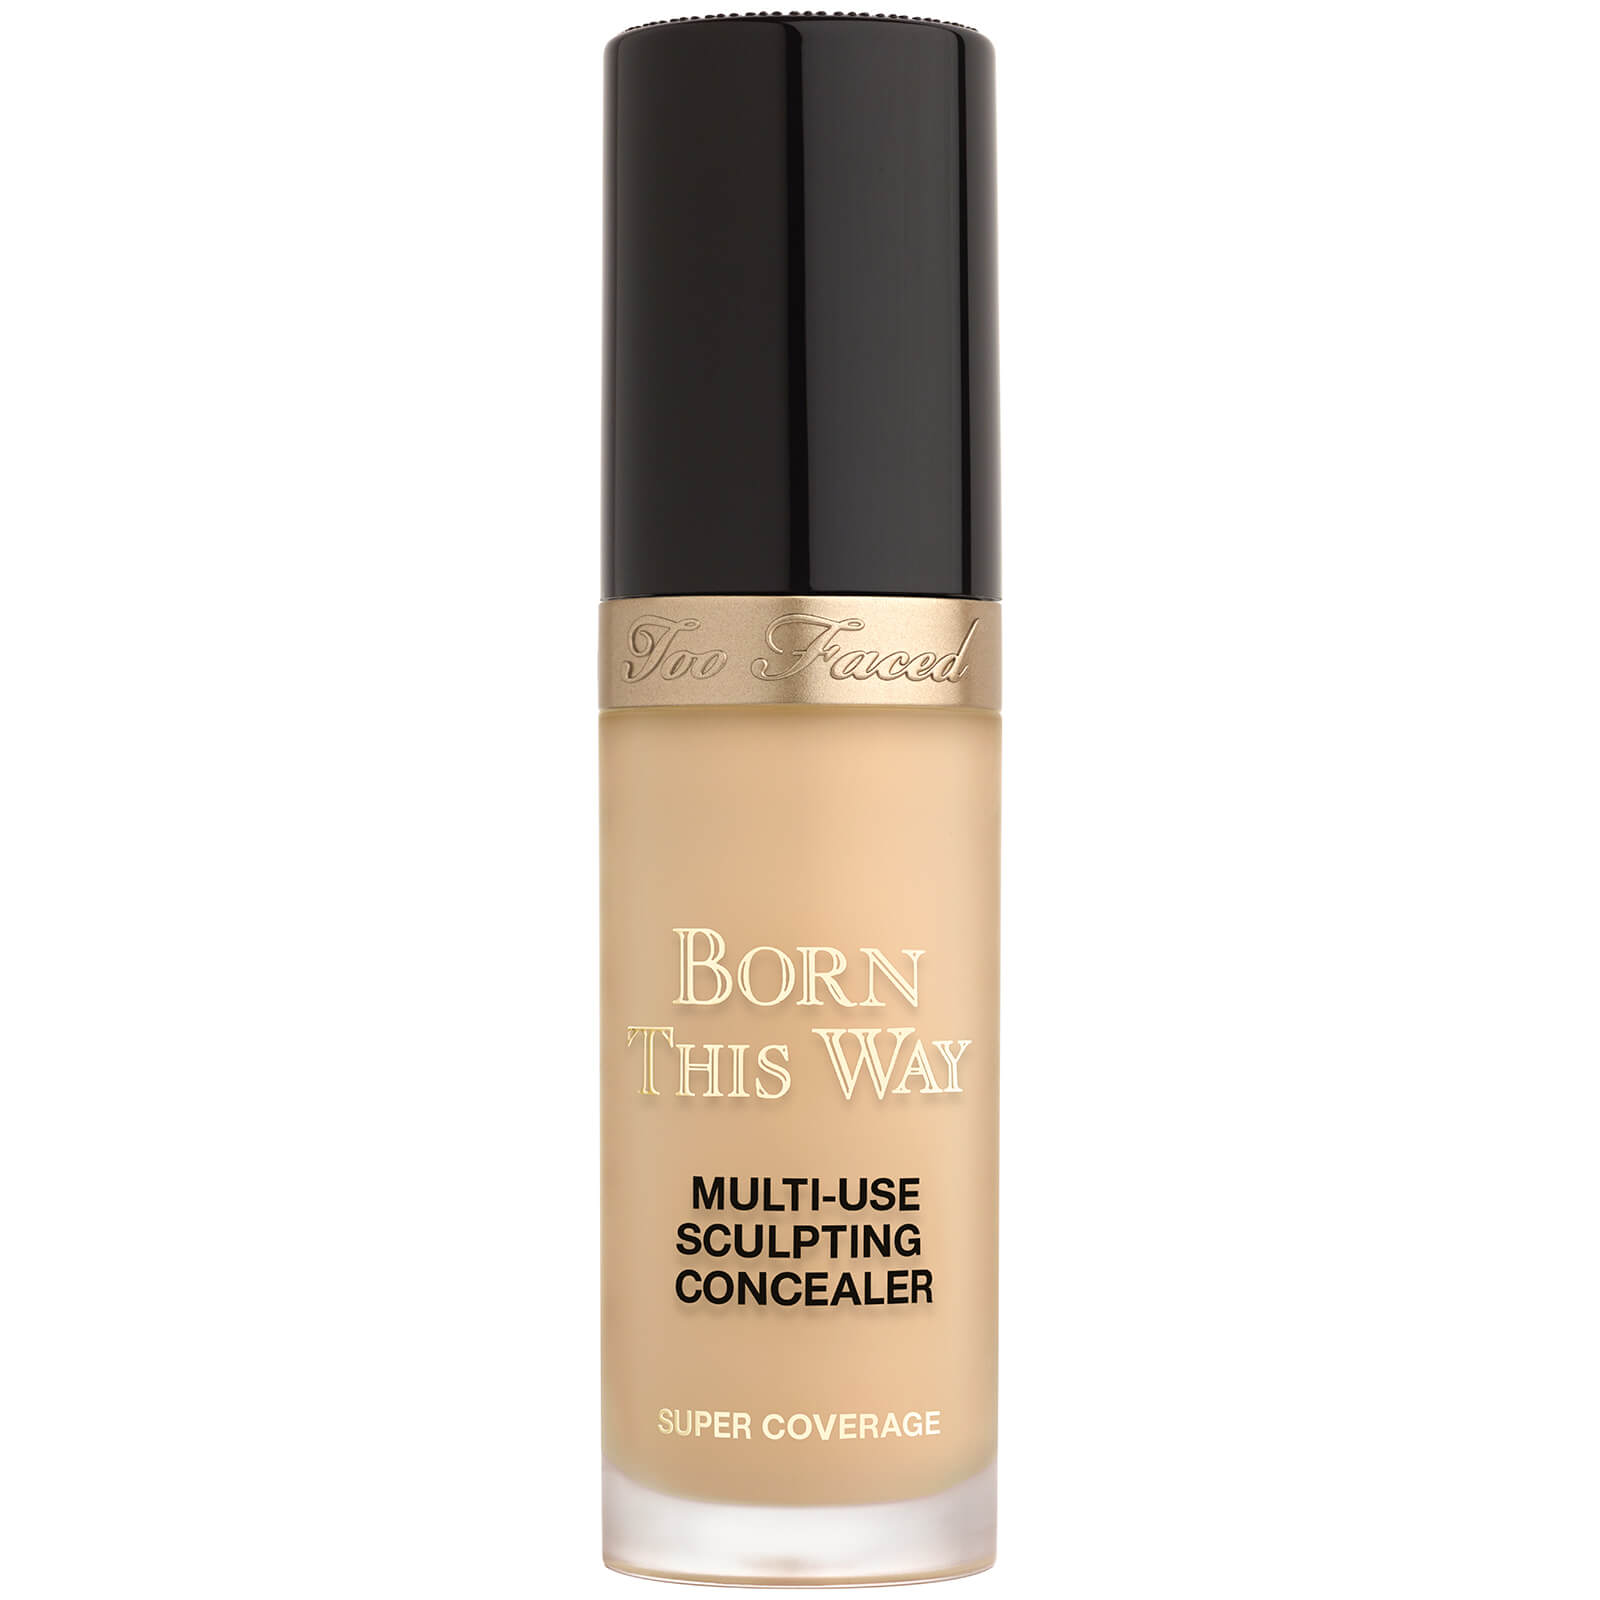 Too Faced Born This Way Super Coverage Concealer 15ml (Various Shades) - Golden Beige